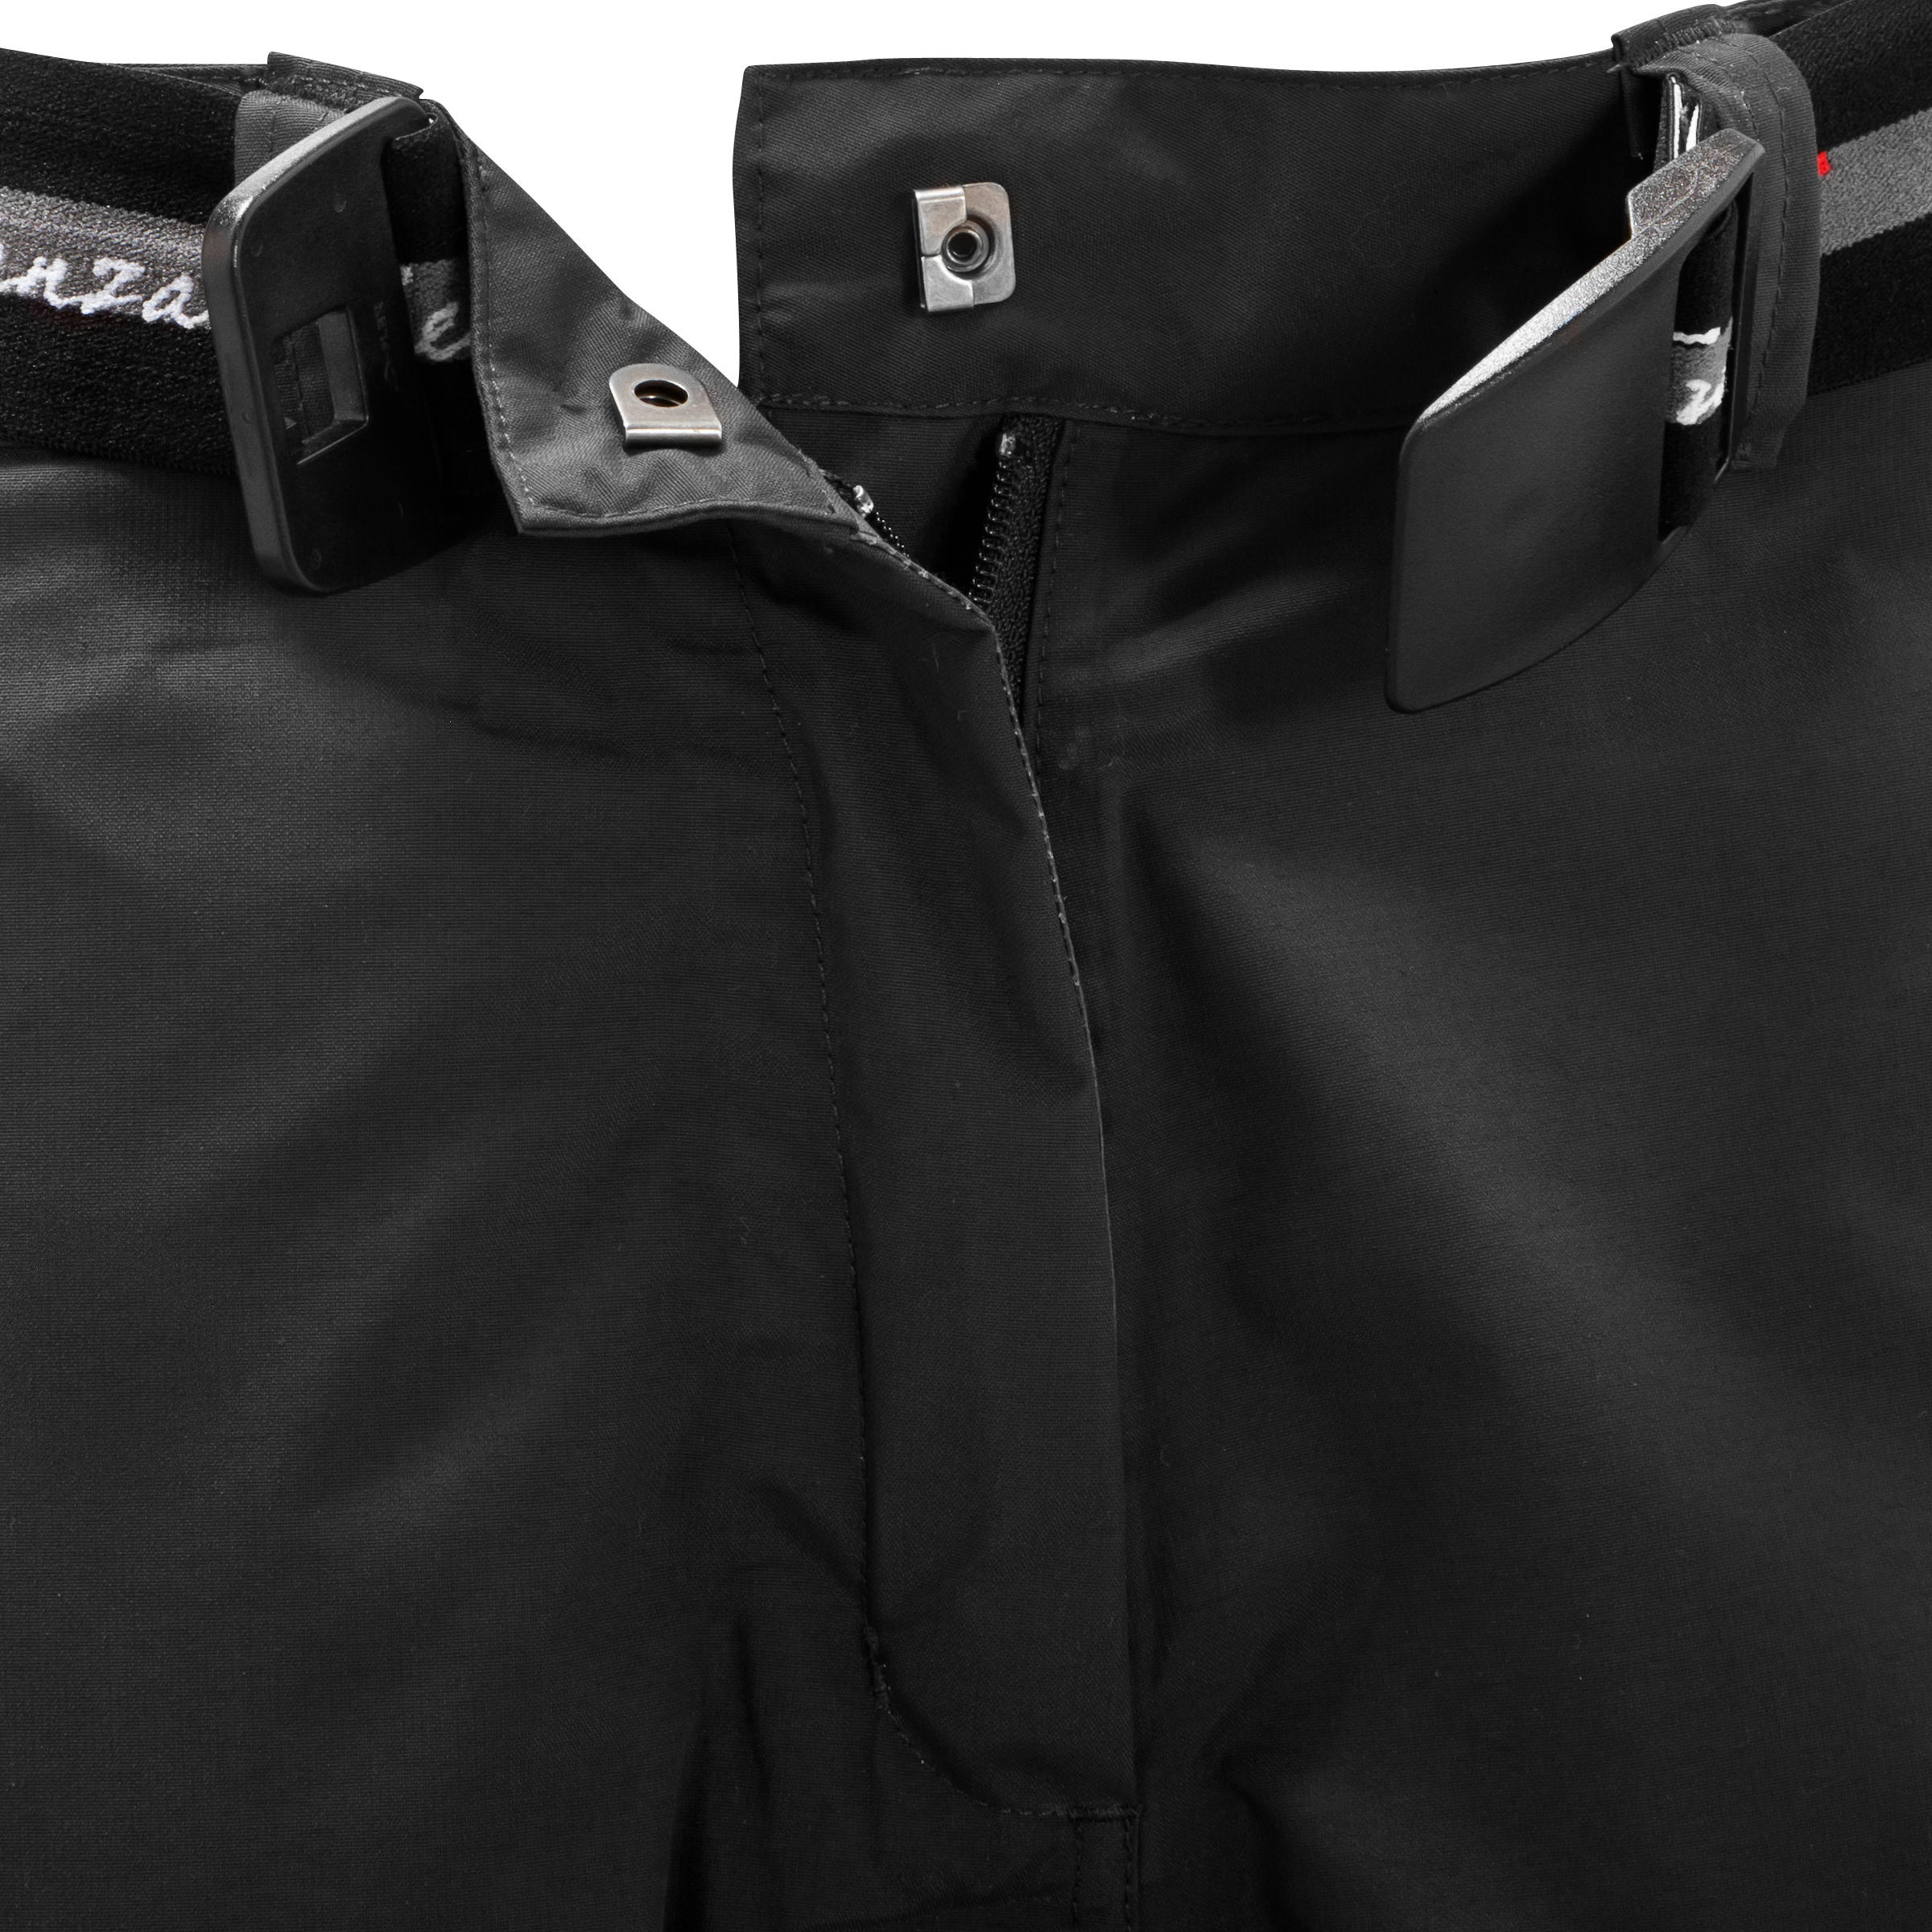 500 Adult 2-in1 Waterproof Horse Riding Overtrousers - Black 7/14